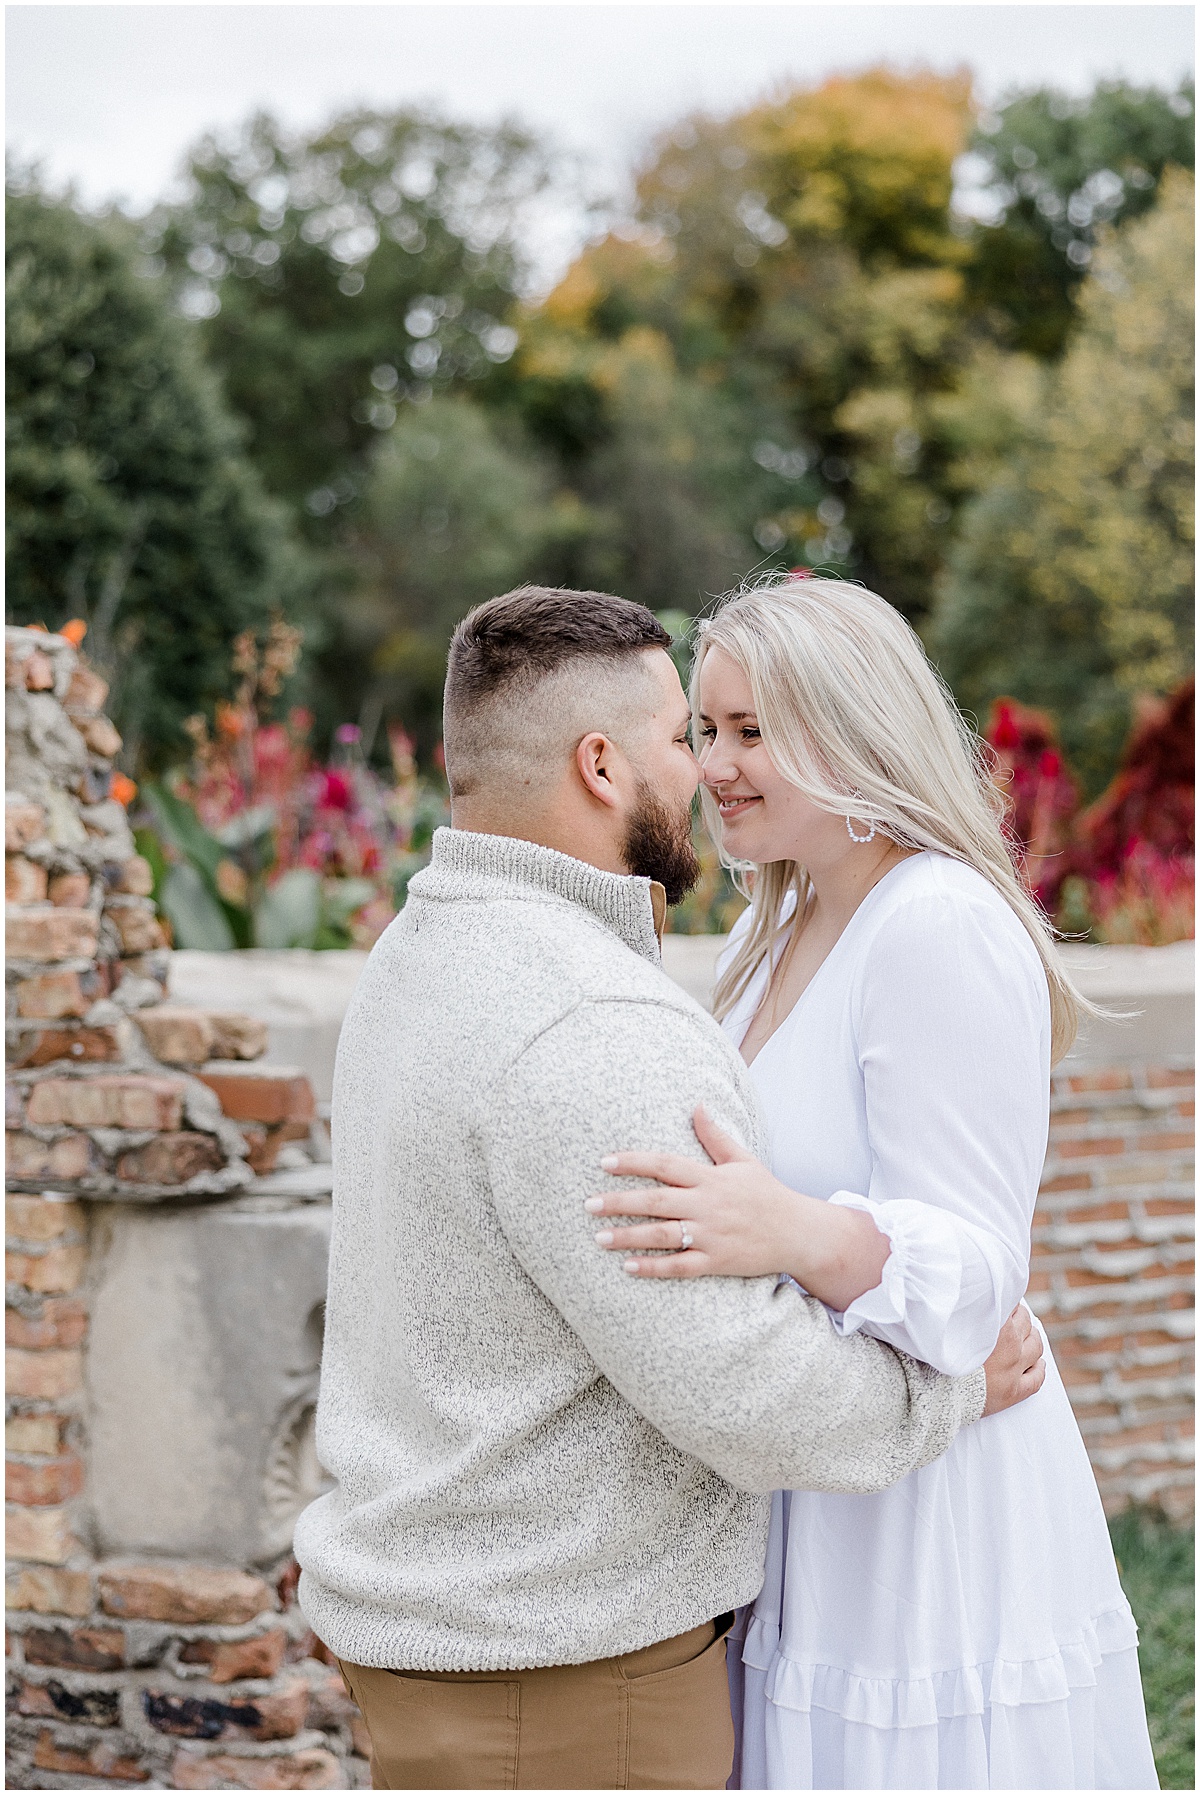 A Holliday Park Engagement Session in Indianapolis, Indiana in the Fall photographed by Kaitlin Mendoza Photography.